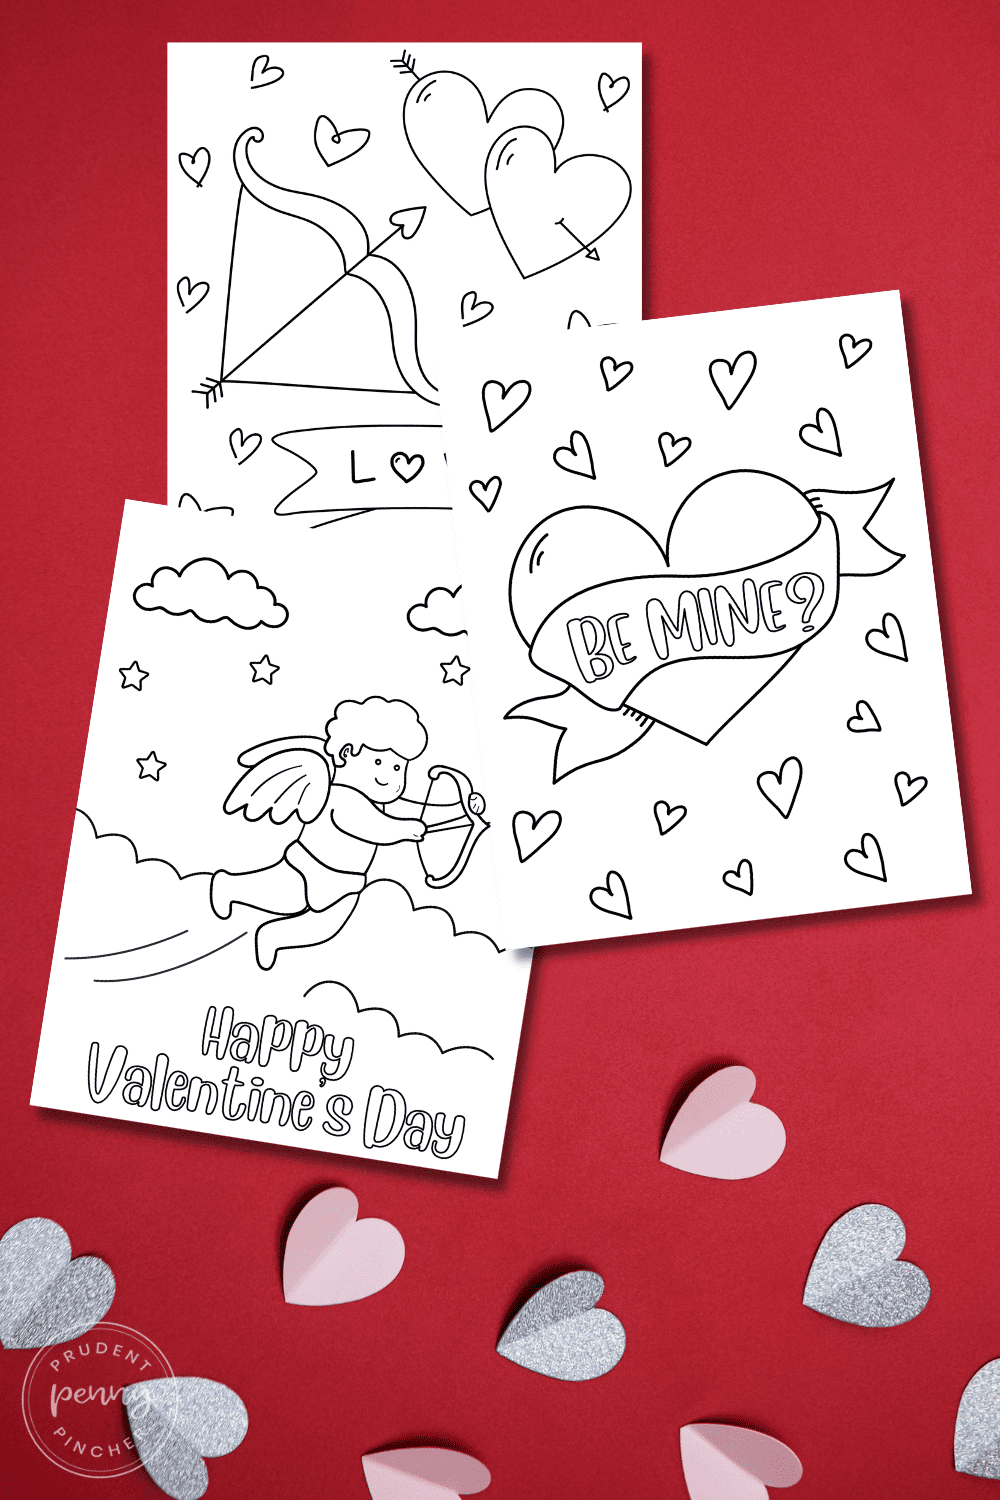 free Valentine's Day coloring pages for kids on a red background with paper hearts